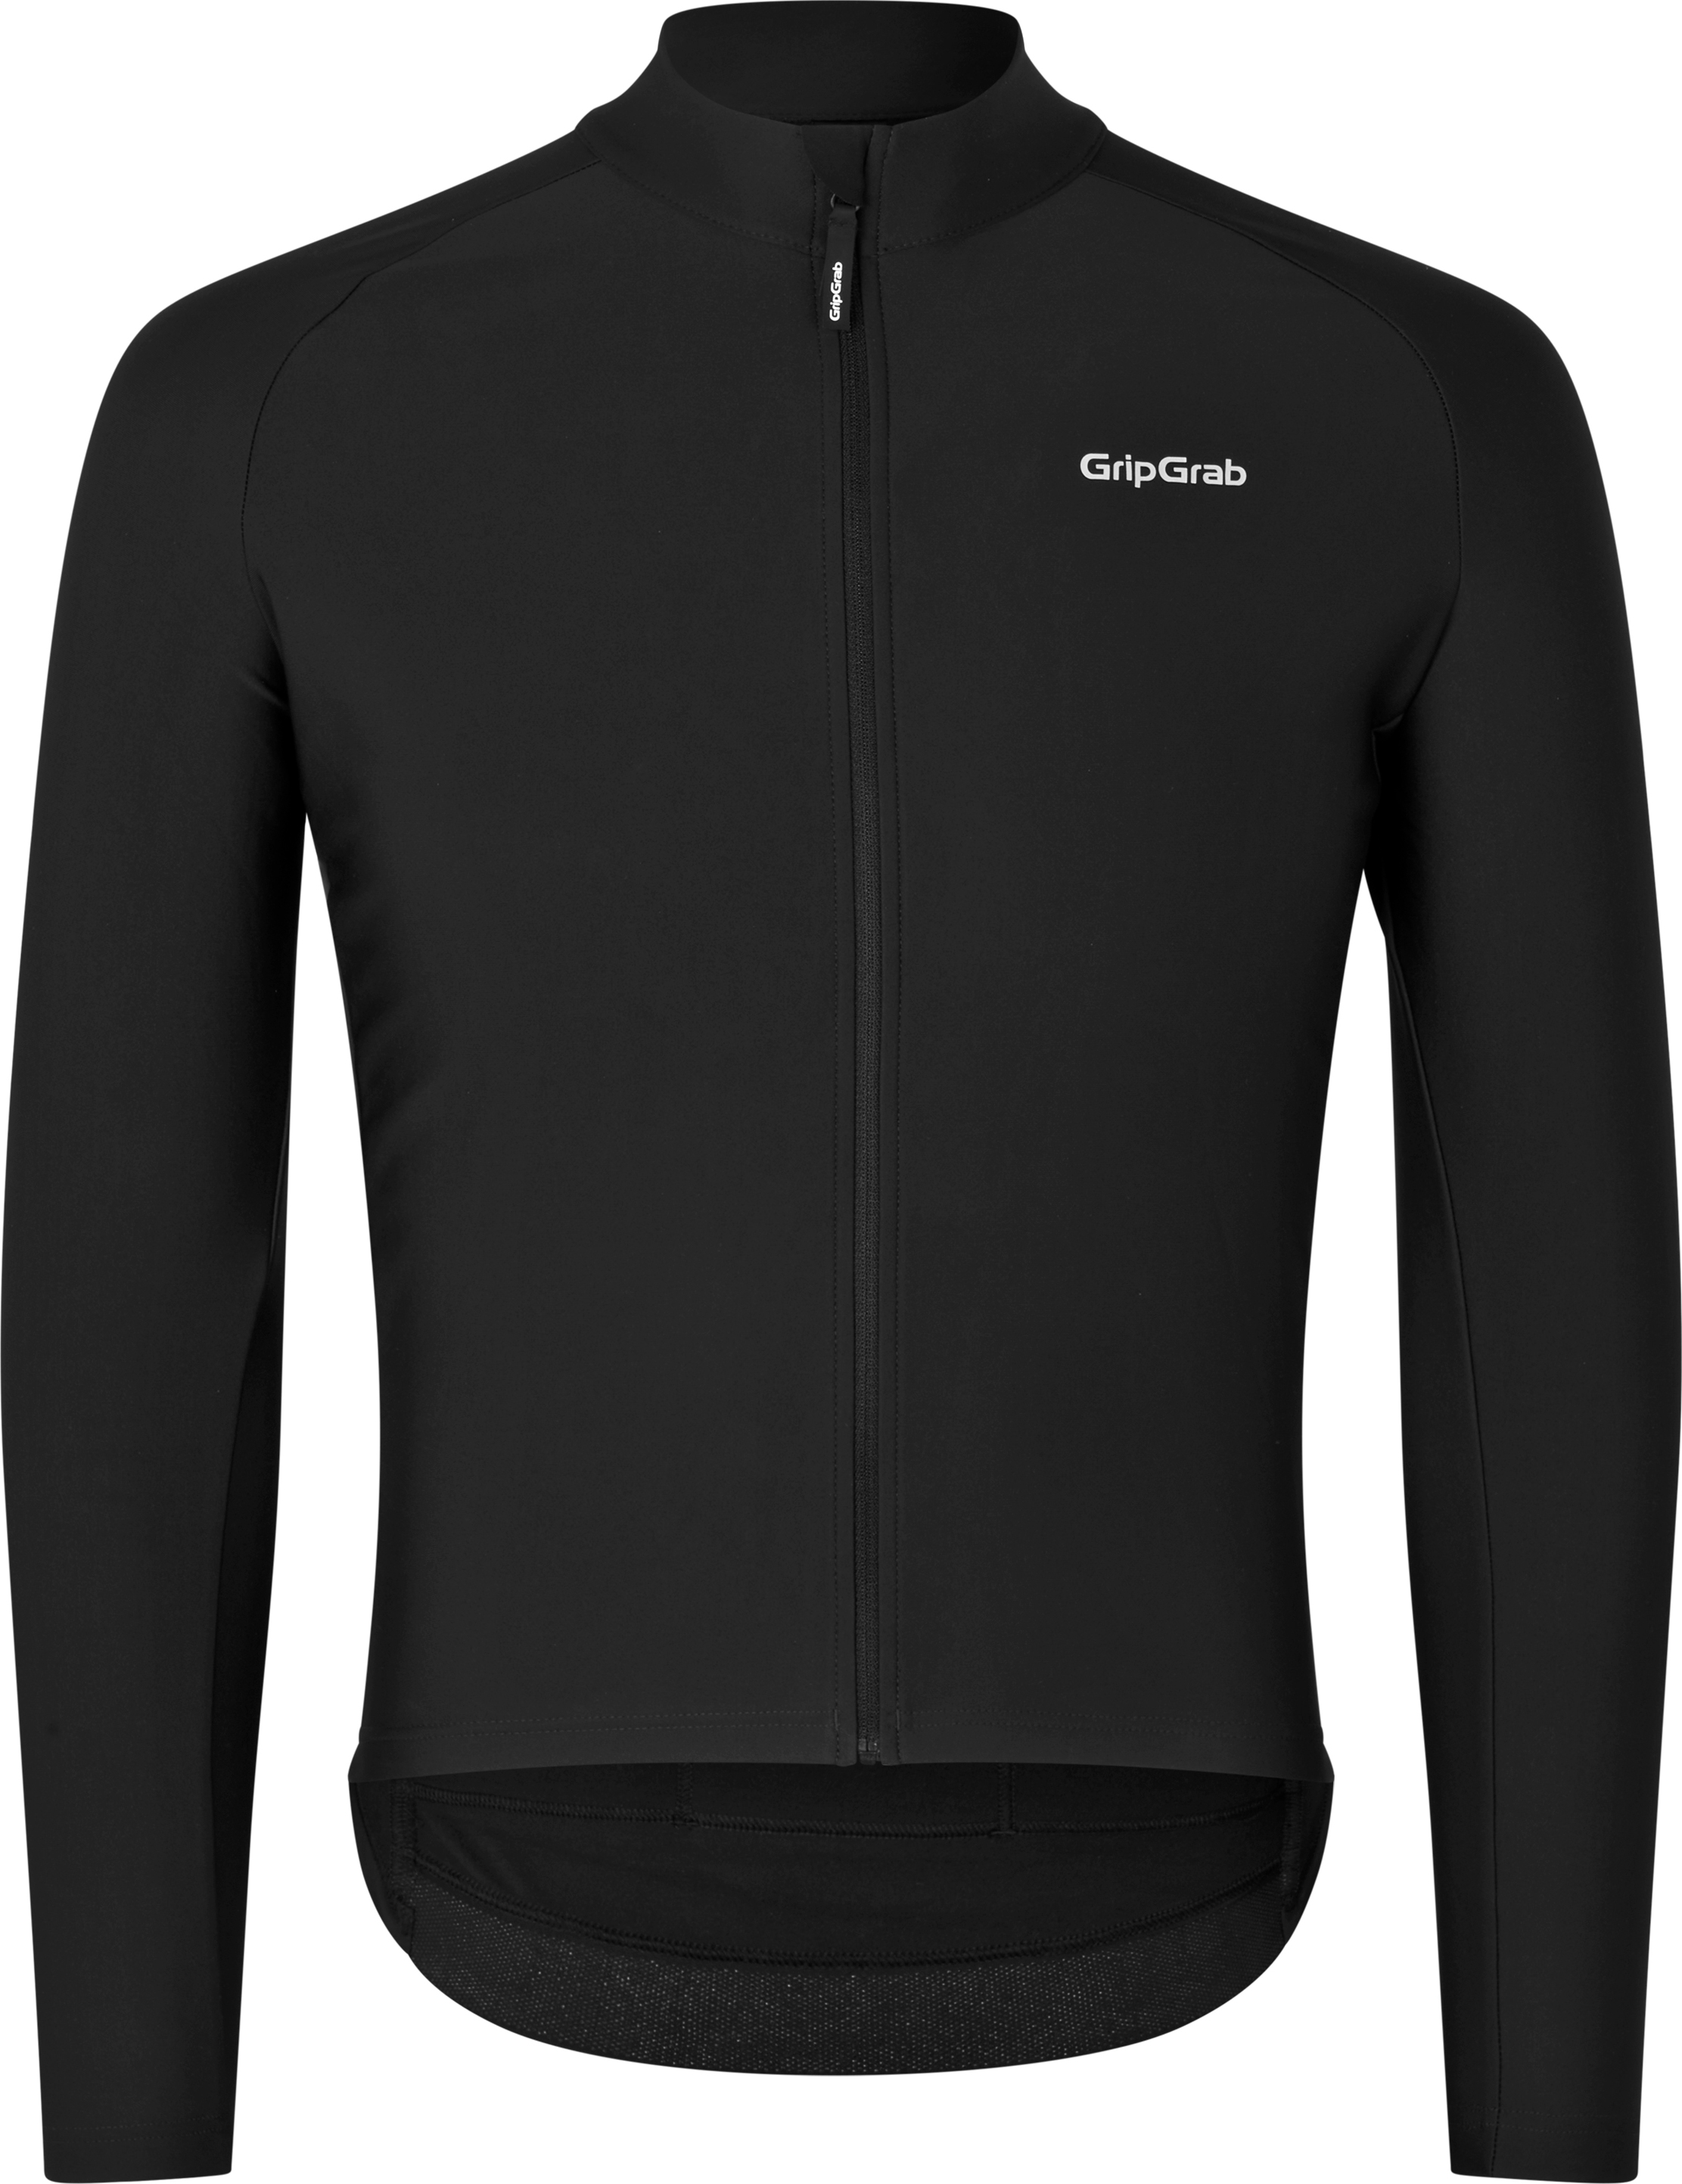 Gripgrab Men’s ThermaPace Thermal Long Sleeve Jersey Black